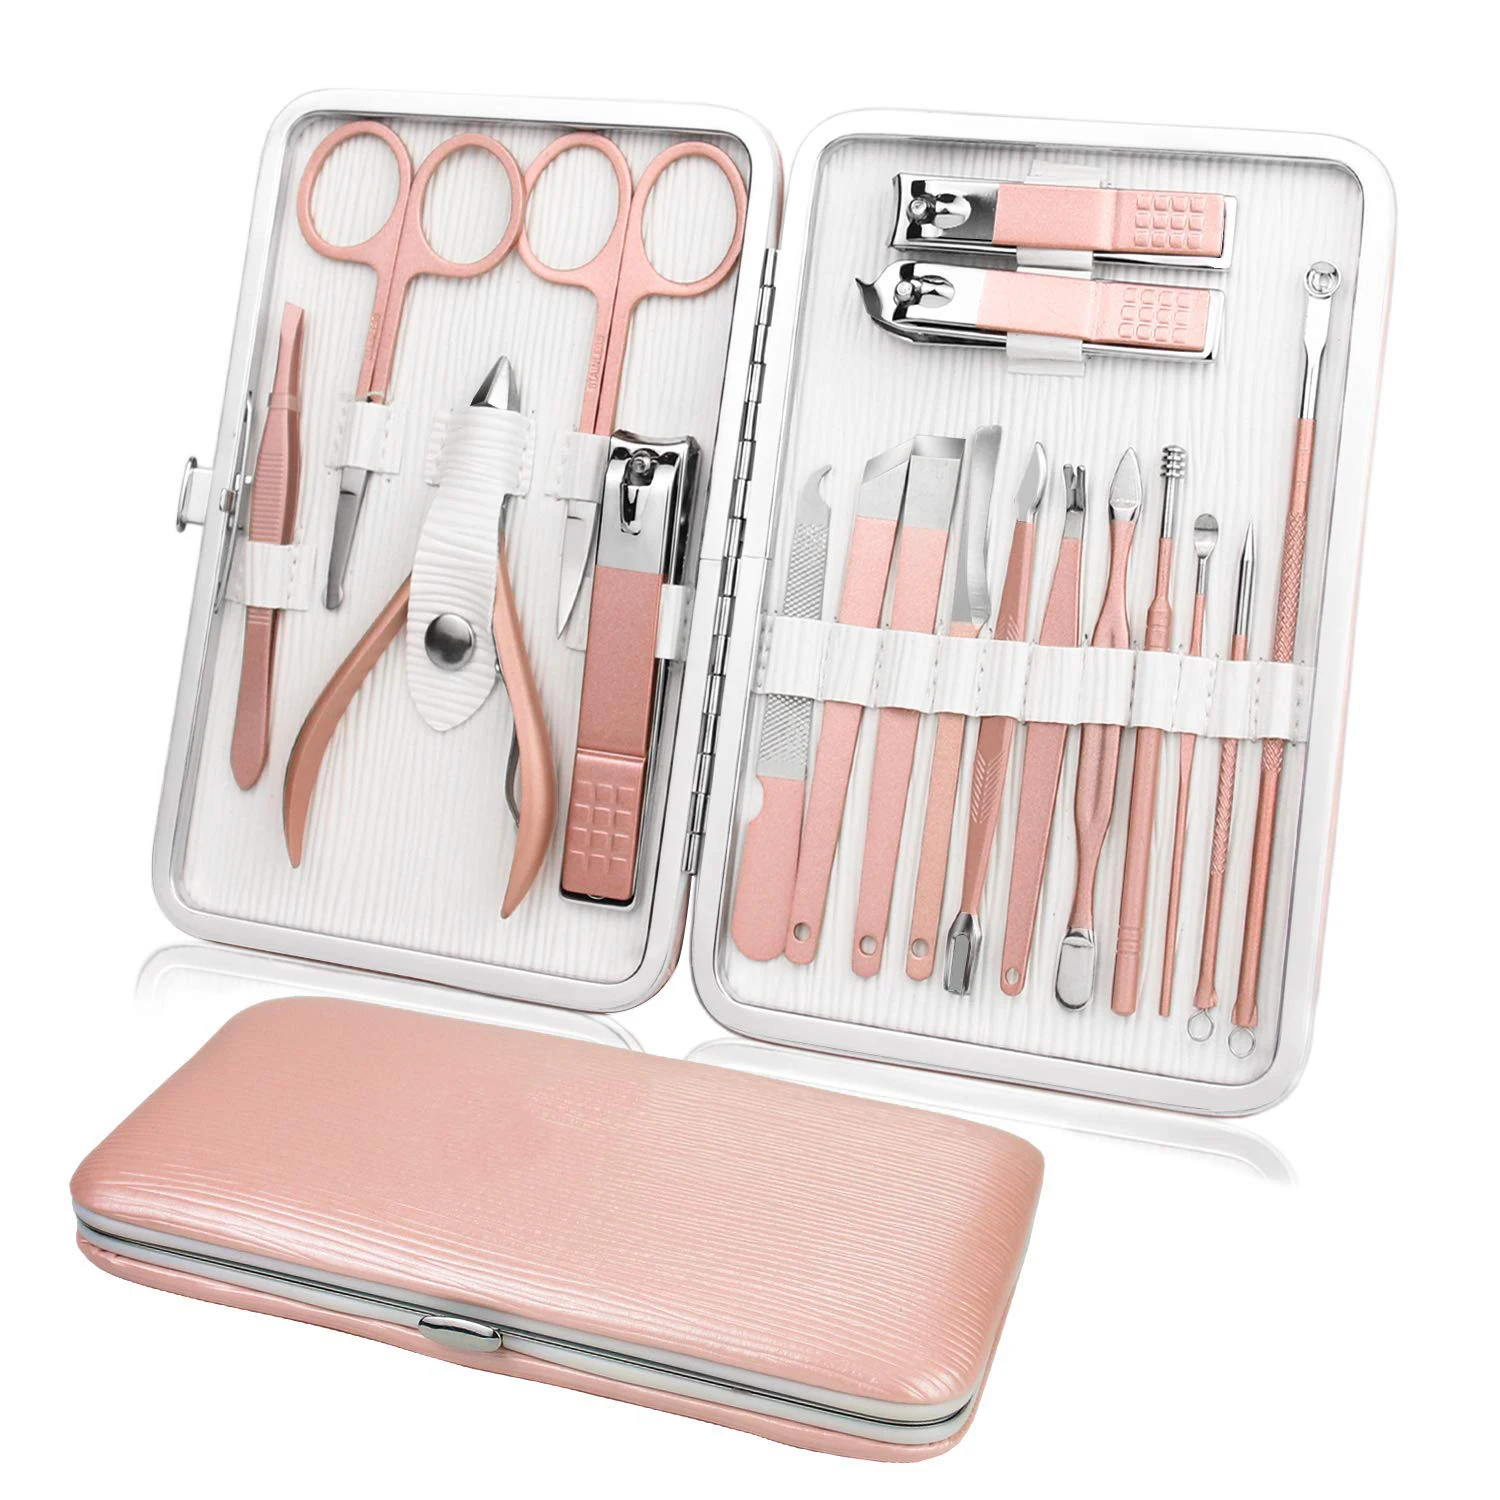 Manicure Pedicure Set Travel Professional Stainless Steel Nail Care Kits With Leather Case - Buy Manicure Set Care Kits,Manicure Pedicure With Leather Case Product Alibaba.com